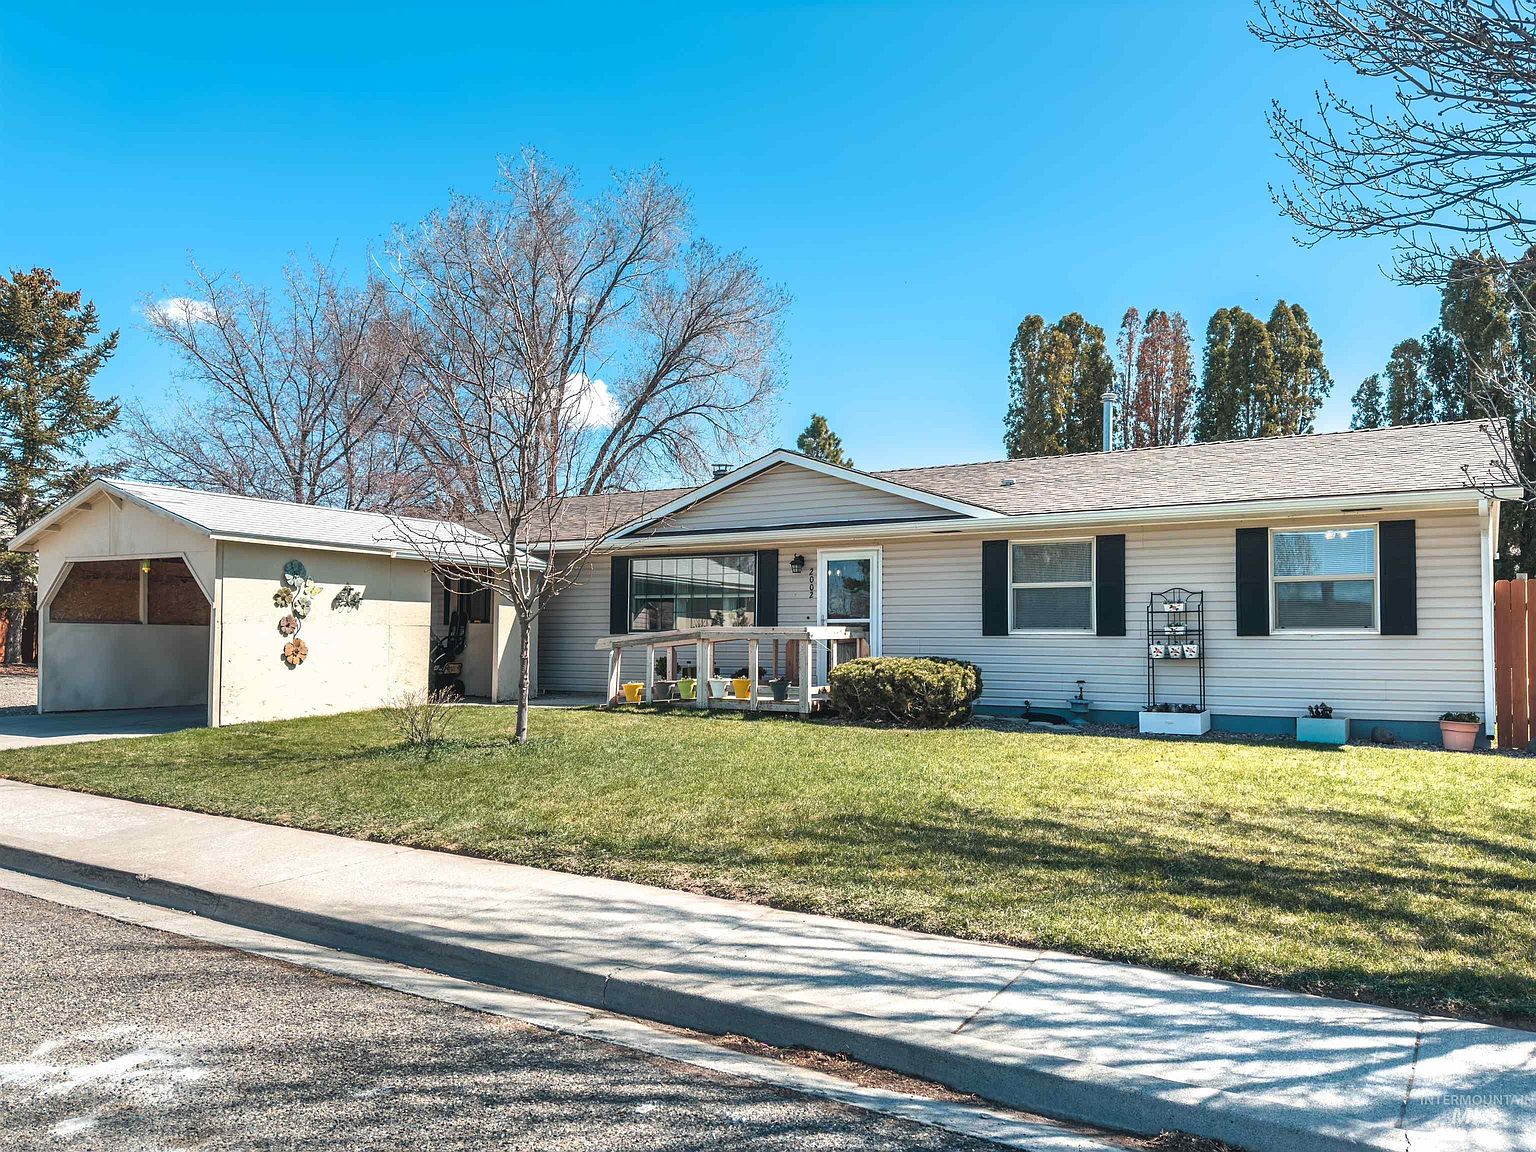 2002 N Hayes St, Jerome, ID 83338 | Zillow